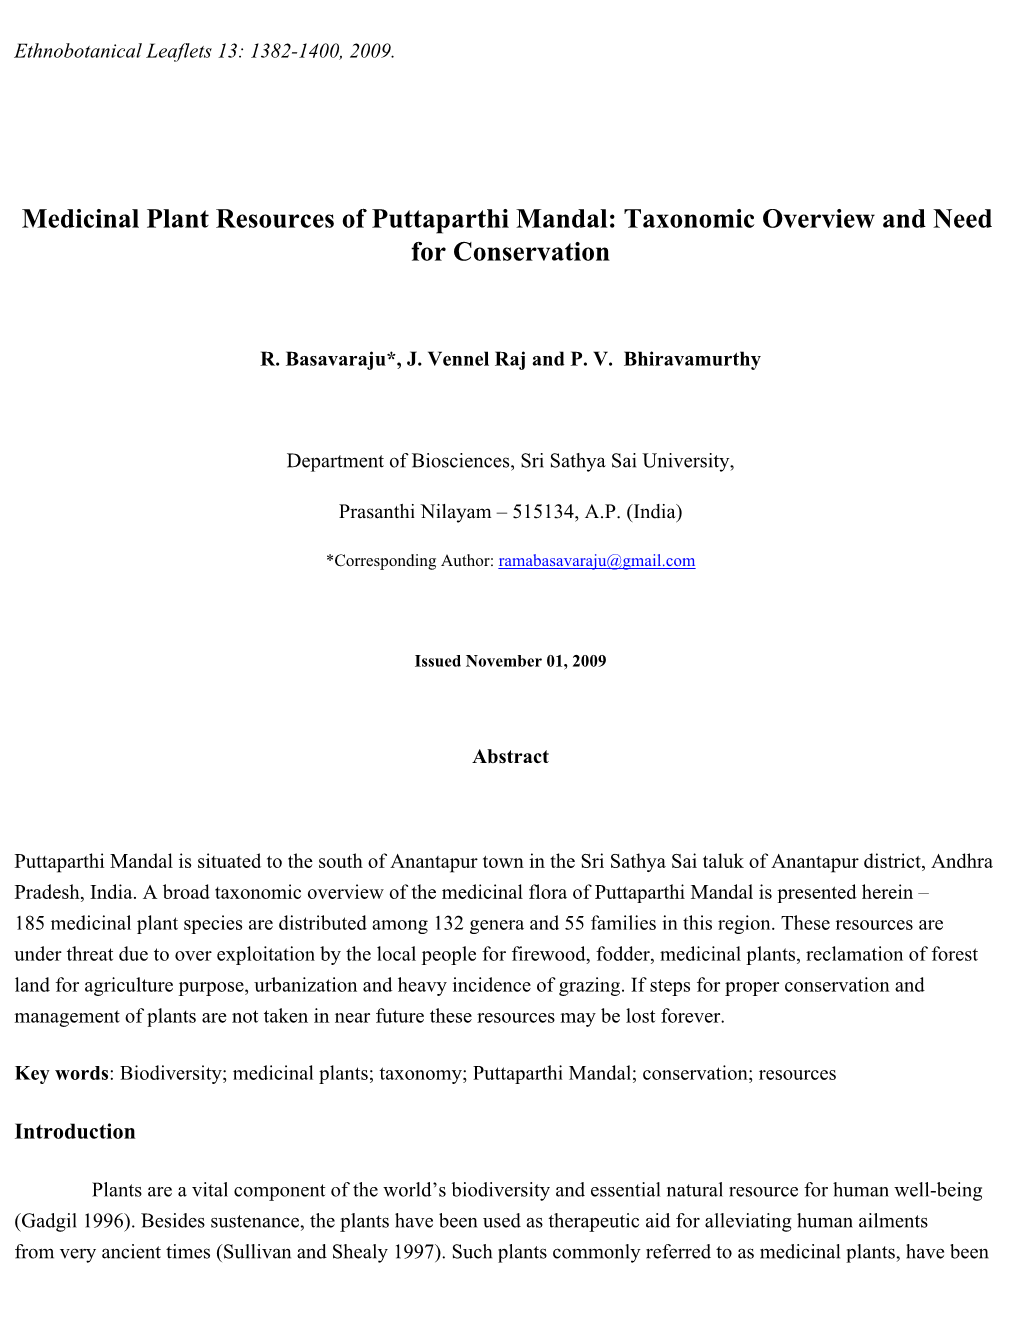 Medicinal Plant Resources of Puttaparthi Mandal: Taxonomic Overview and Need for Conservation